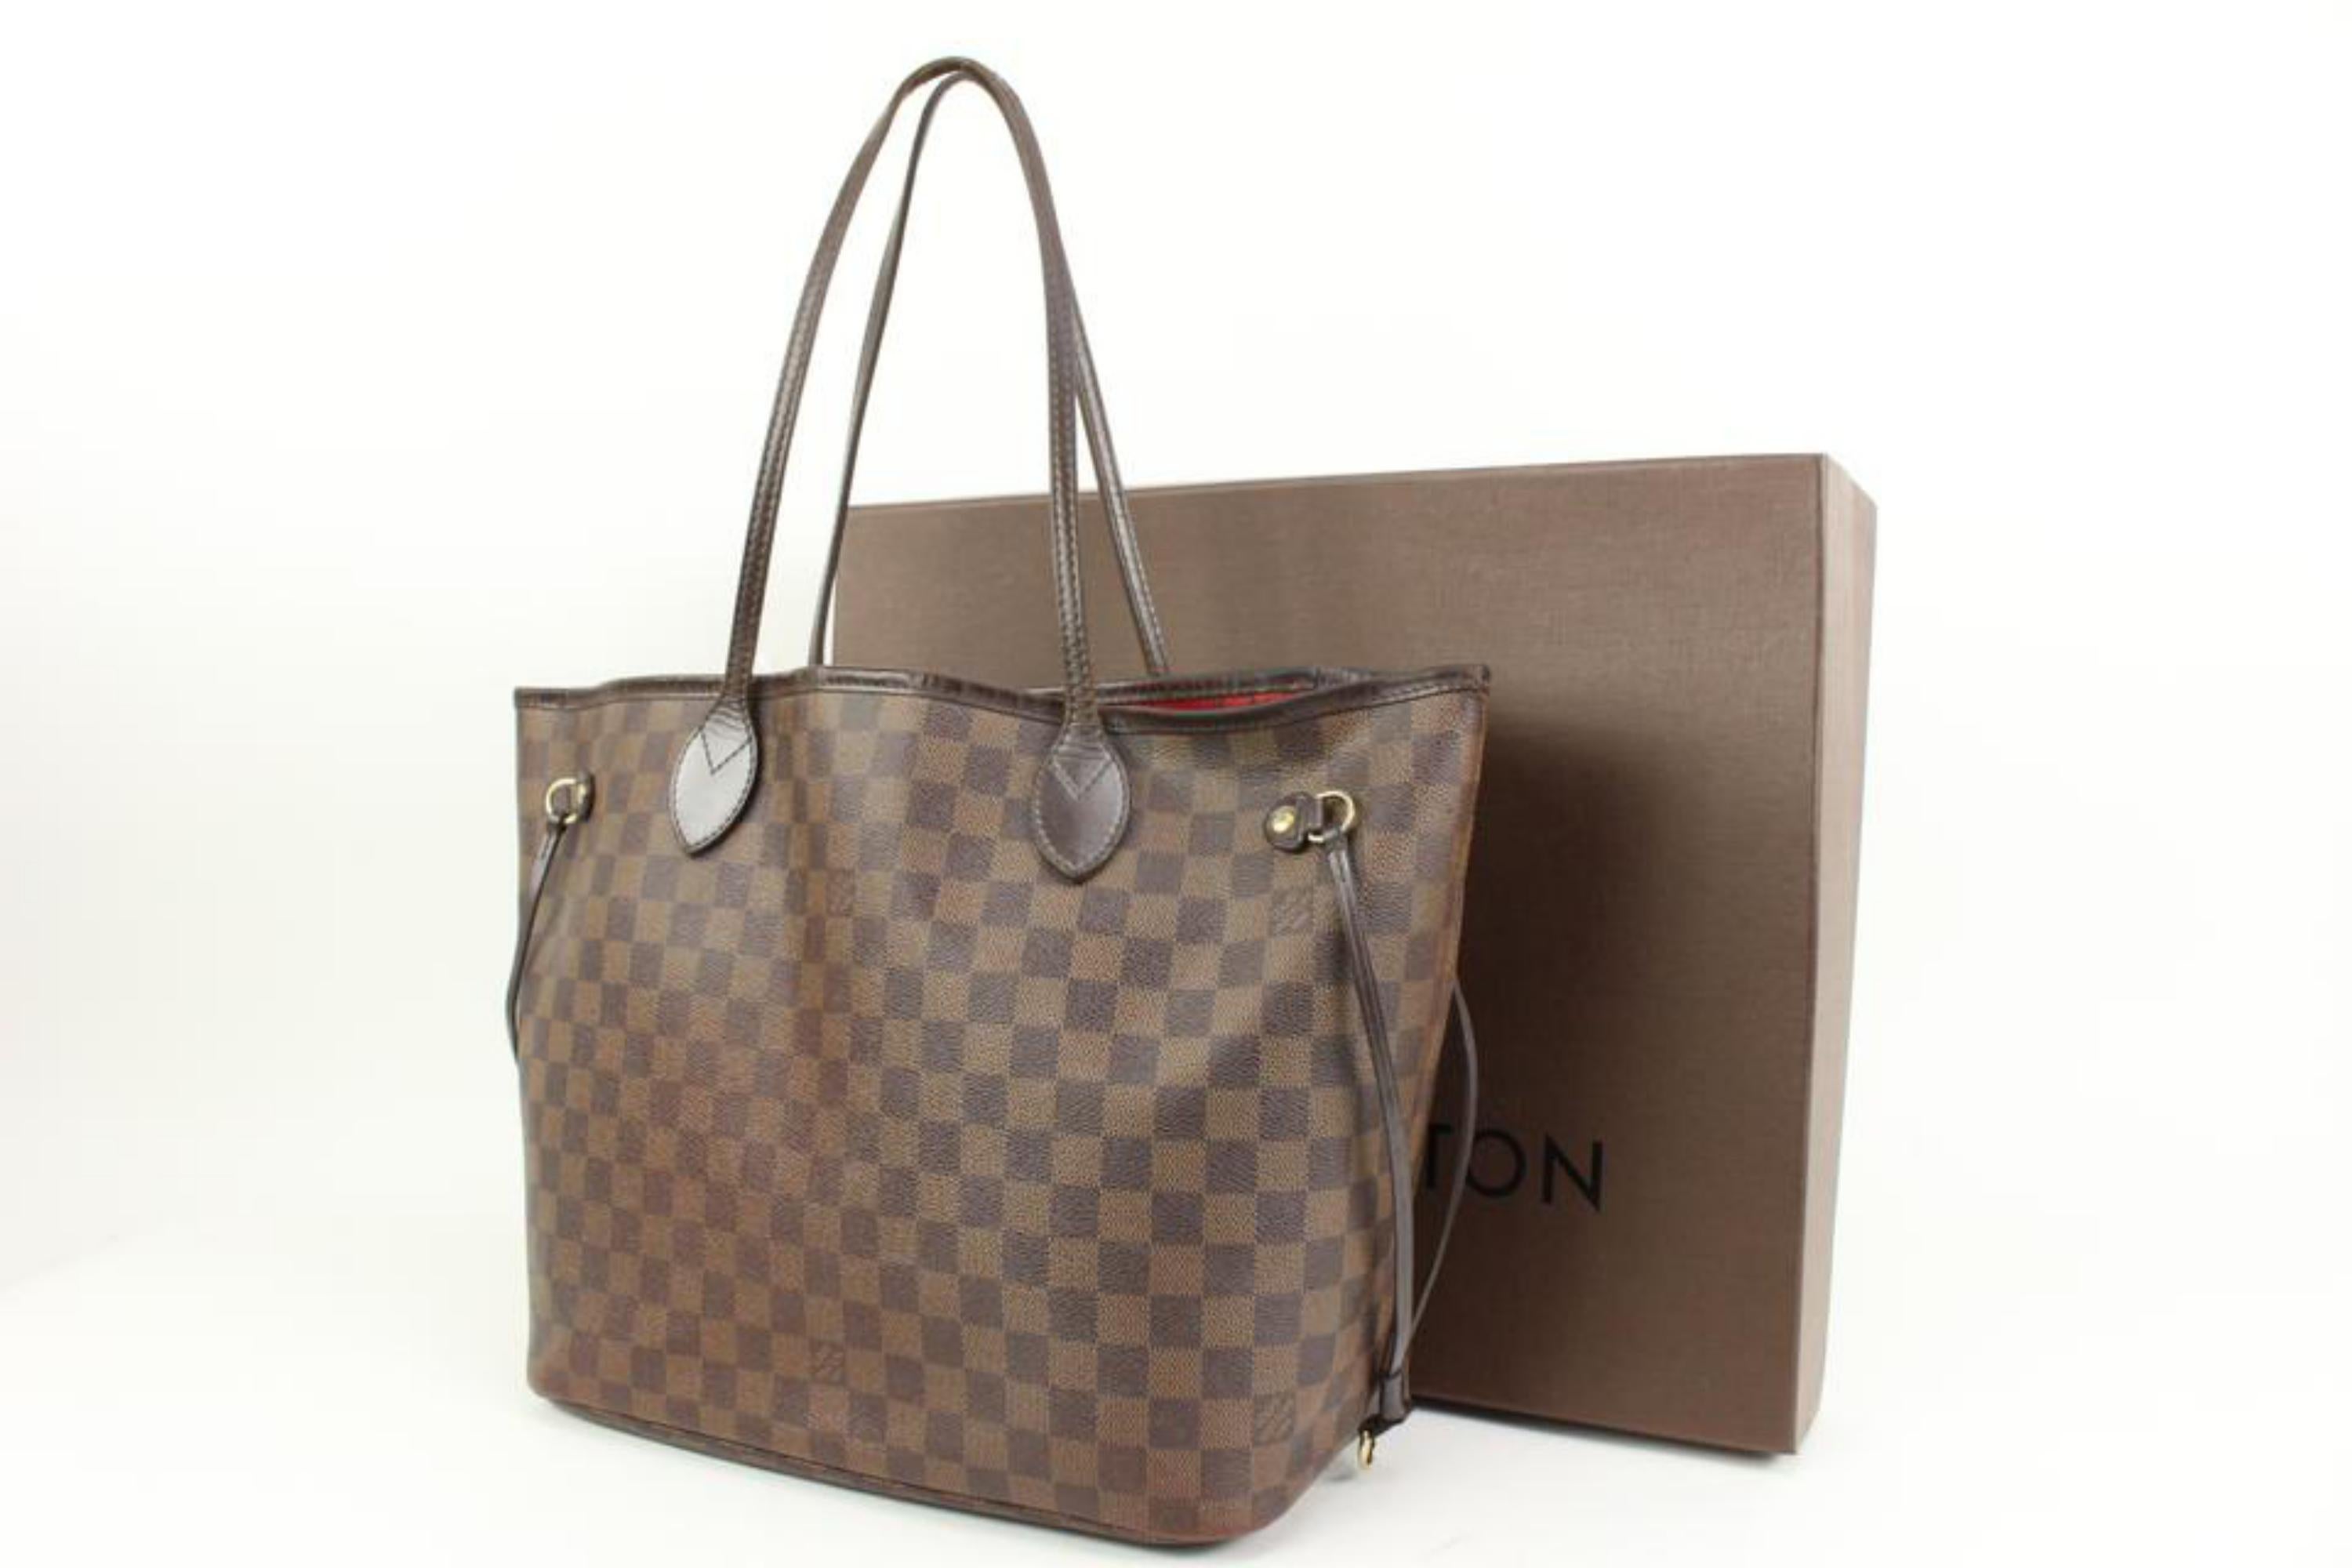 Louis Vuitton Damier Ebene Neverfull MM Tote Bag 95lv318s
Date Code/Serial Number: AR0133
Made In: France
Measurements: Length:  18